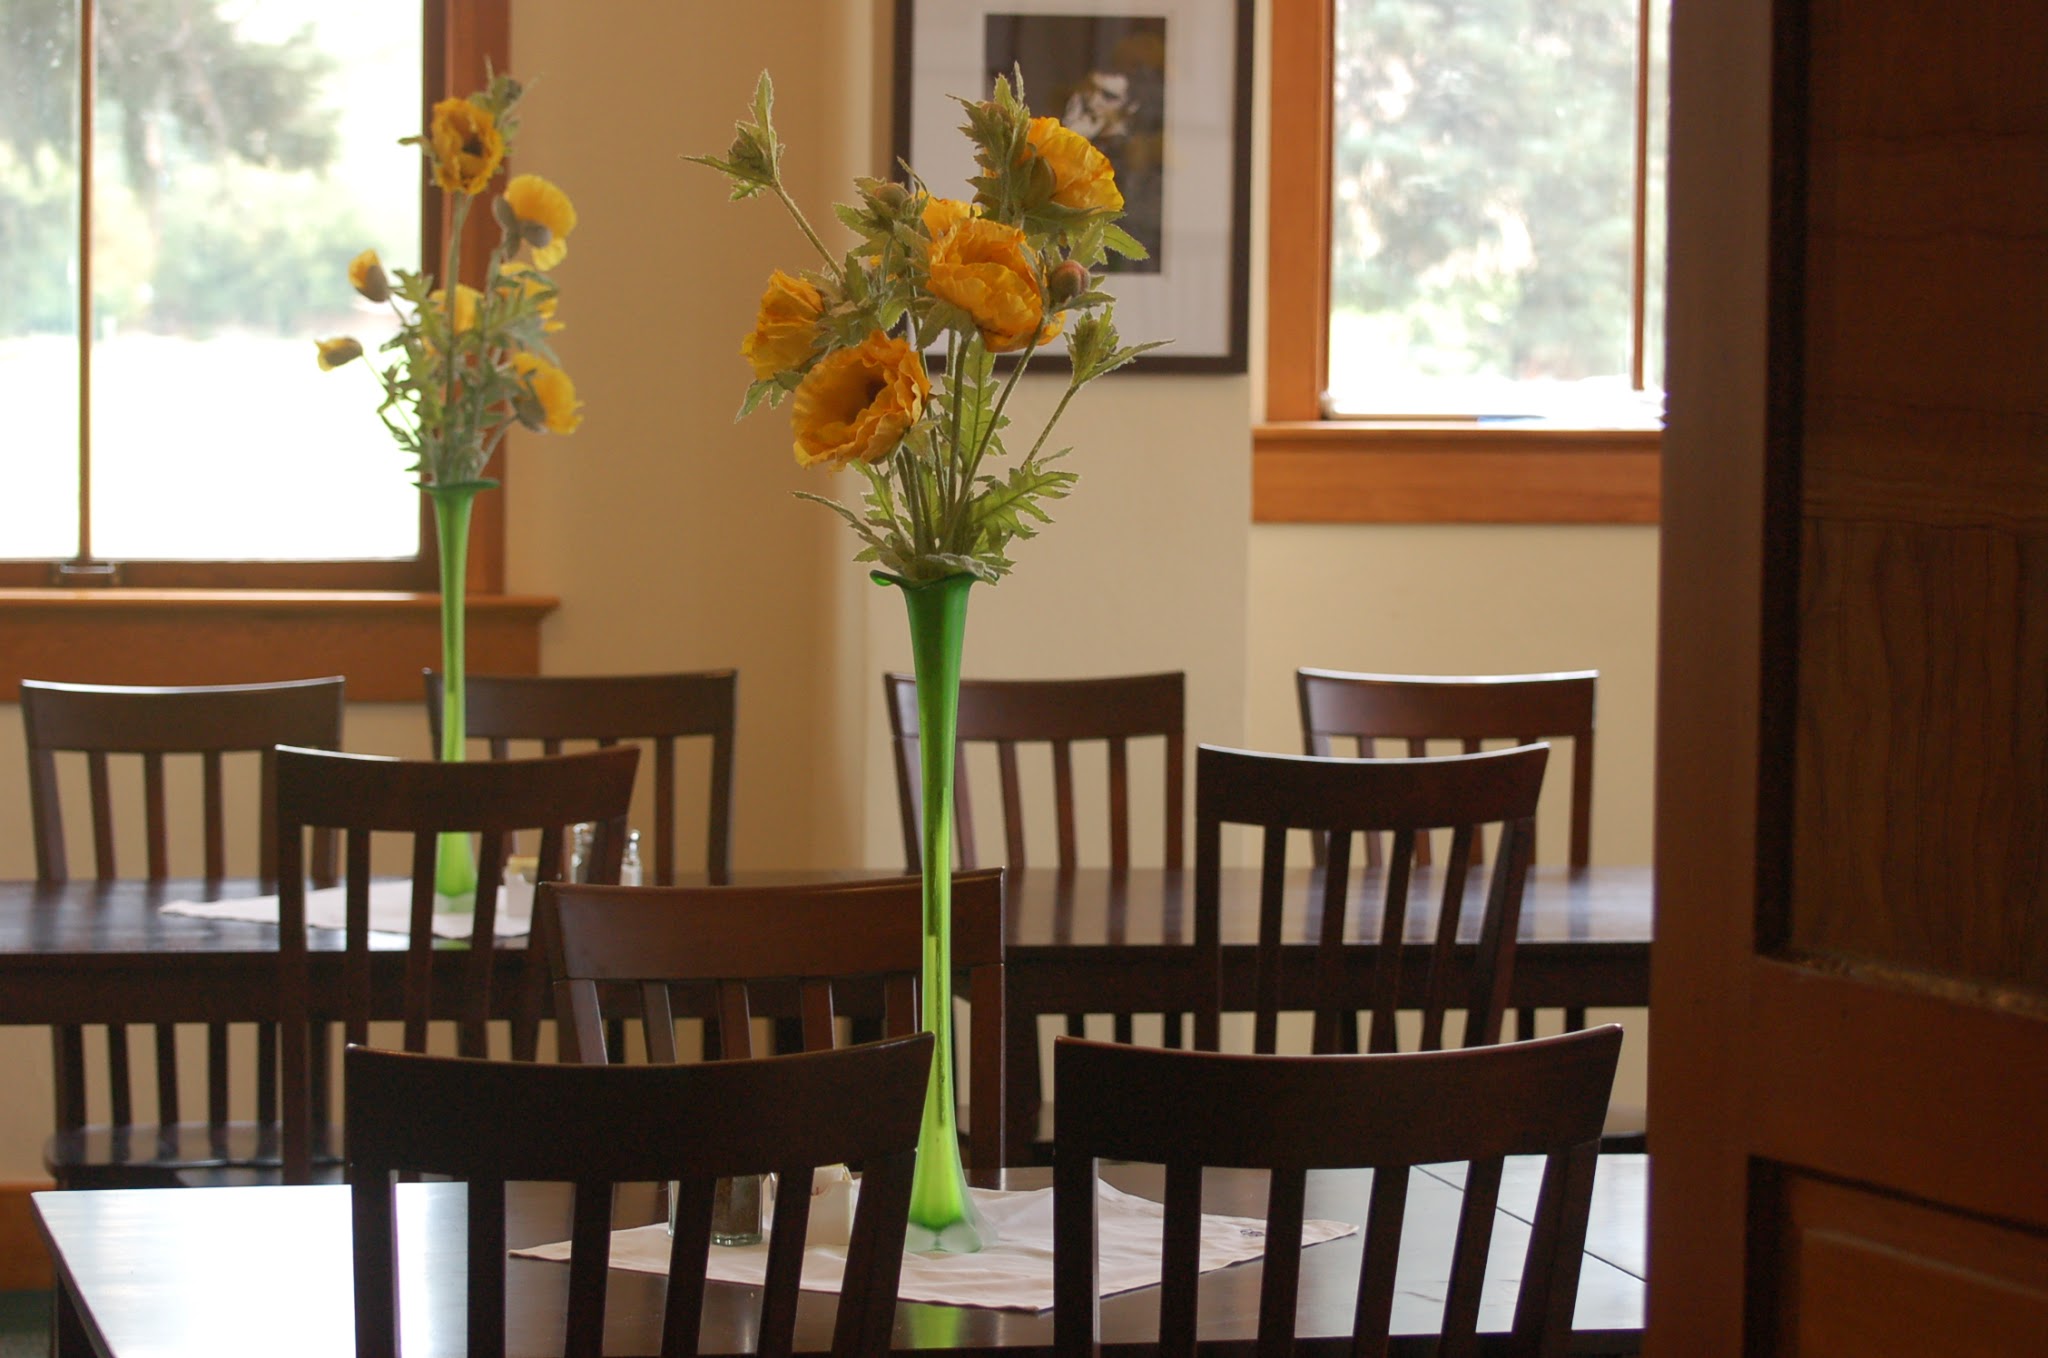 two tables with orange flowers in vases for centerpieces with four chairs at each table